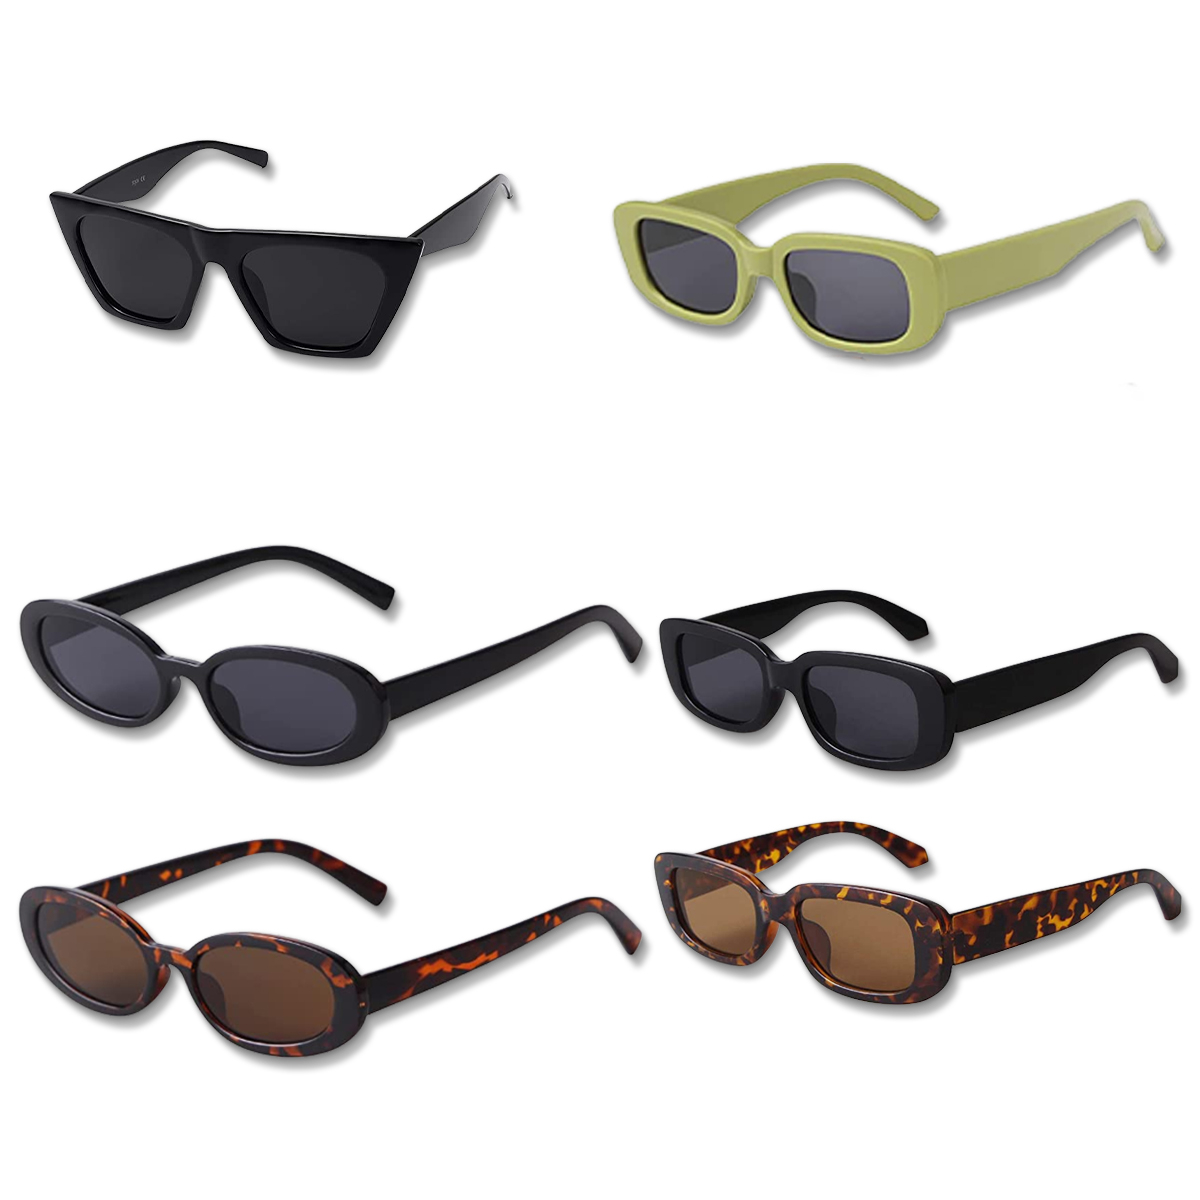 Amazon Sunglasses: The 10 Best-Selling, Top-Rated Shades for $20 & Under – E! Online